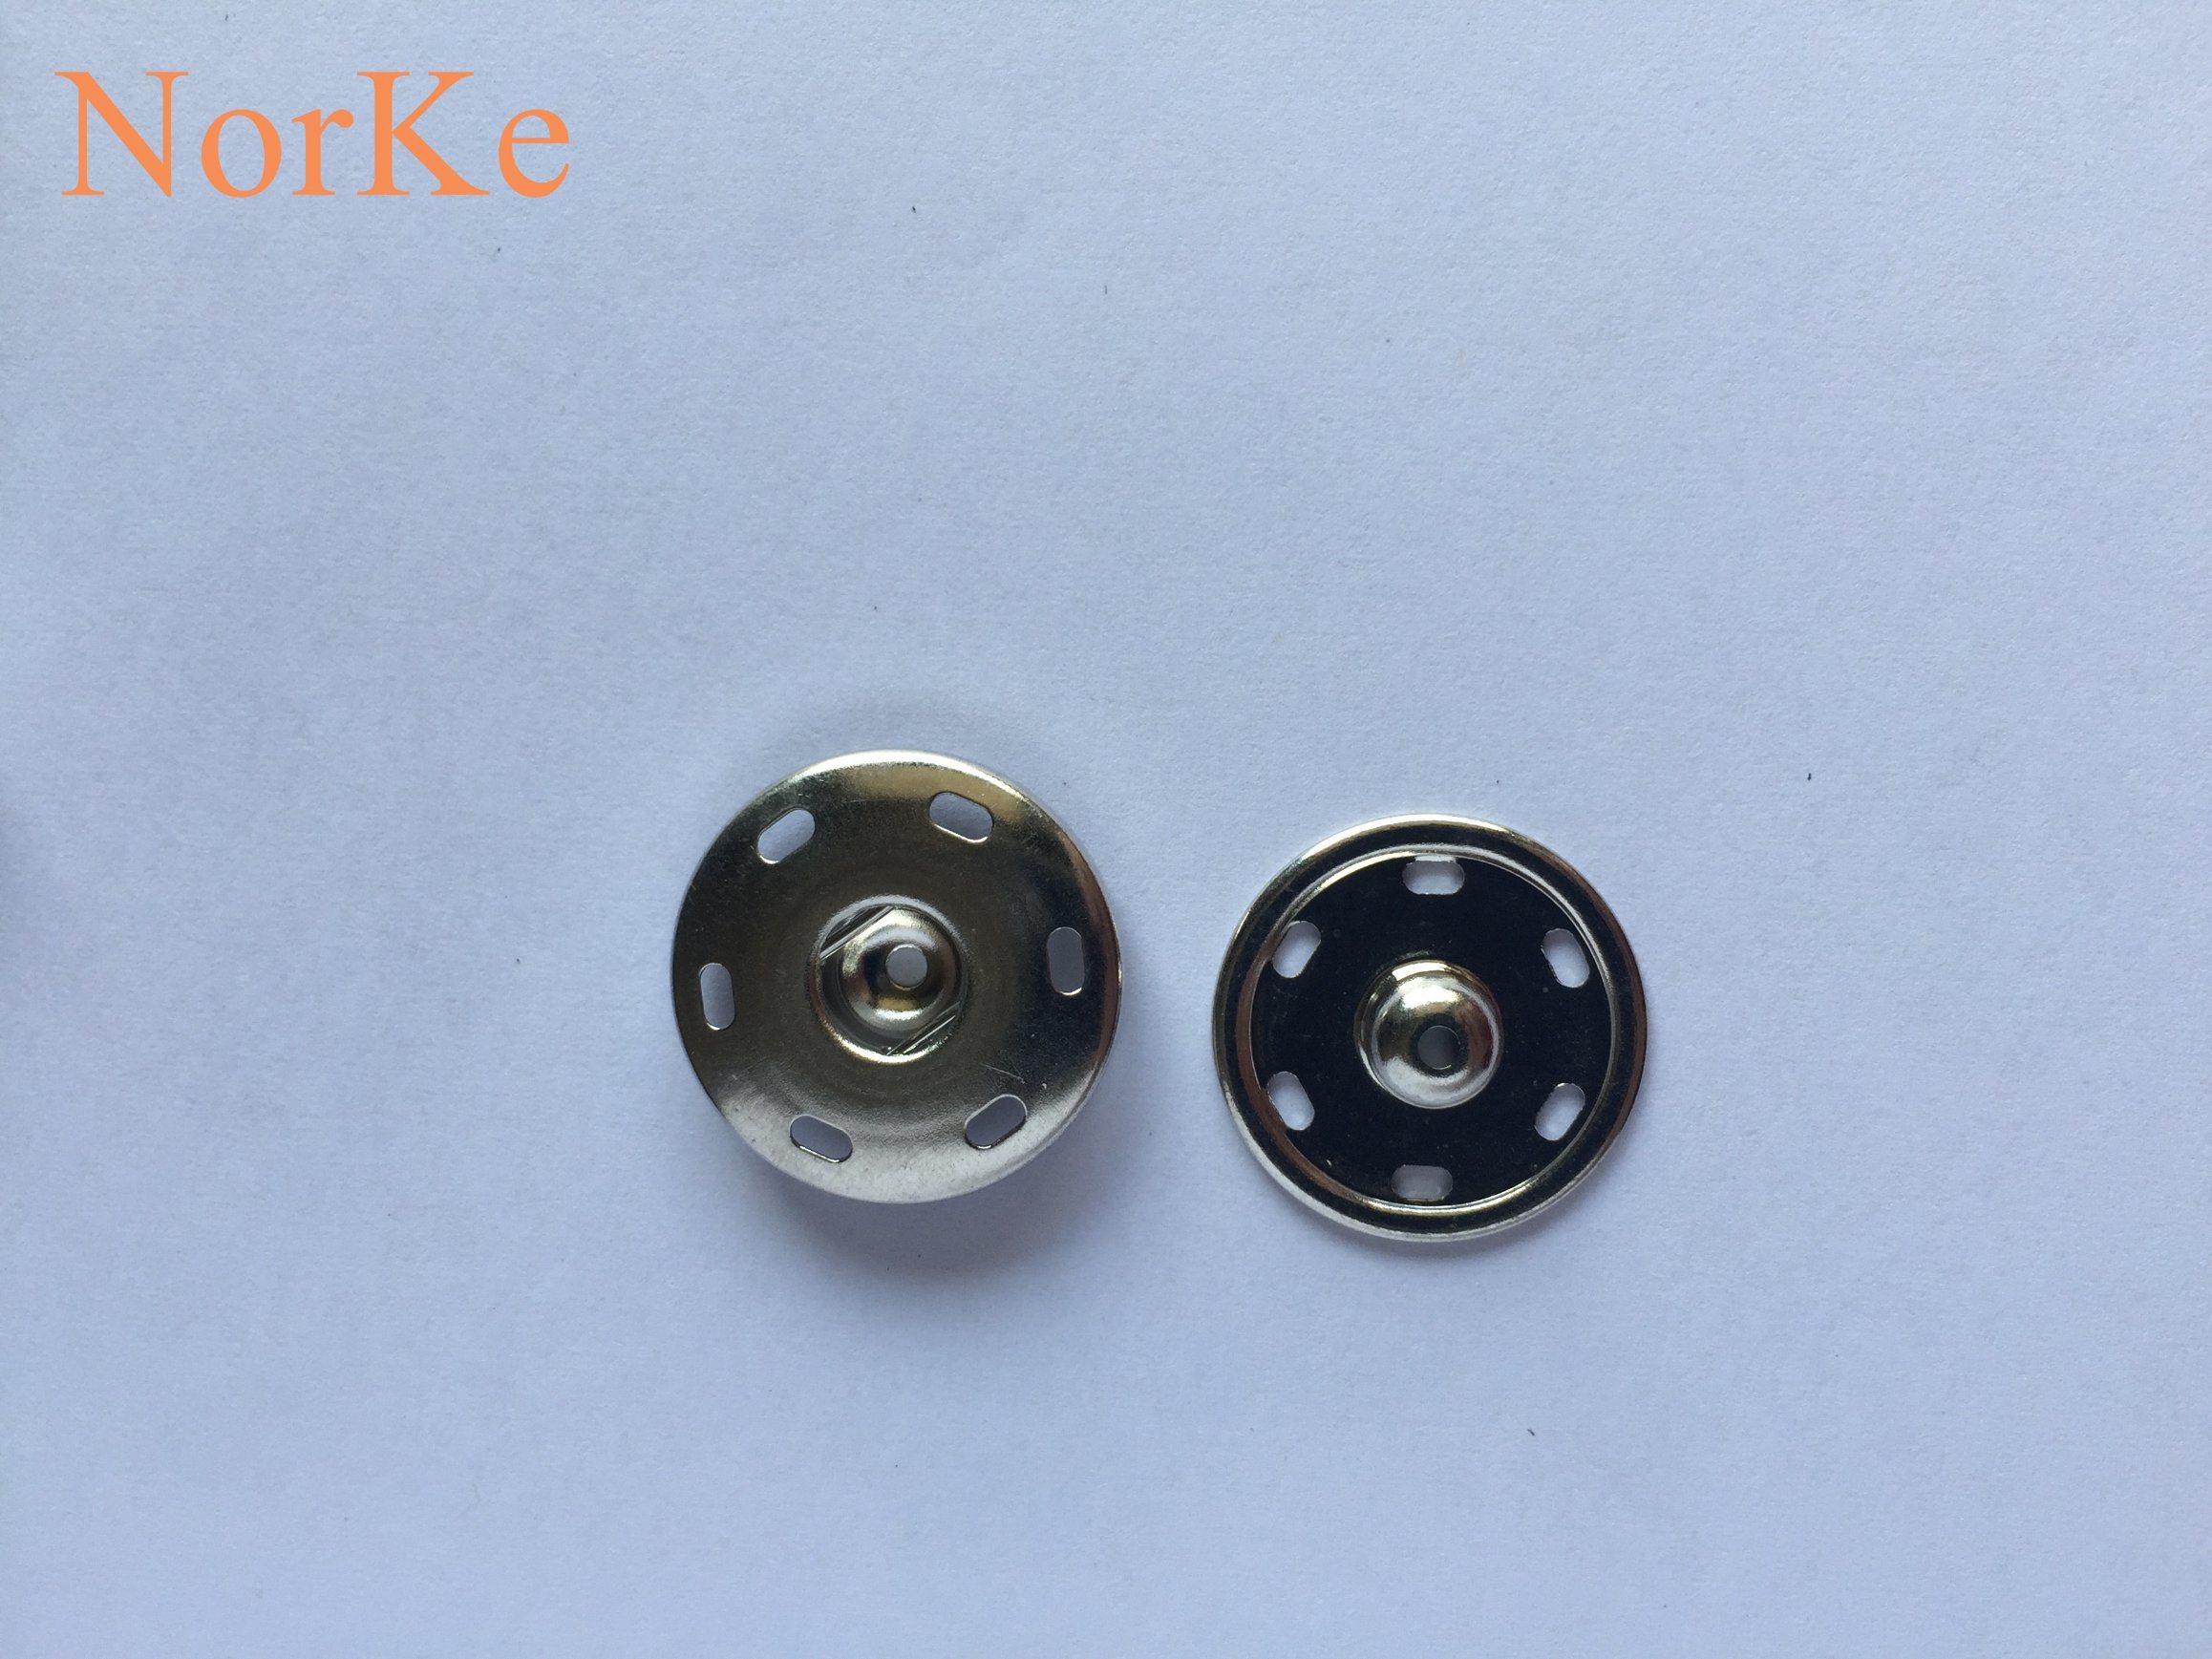 2 Parts Metal Press Snap Button Sewing on Coats